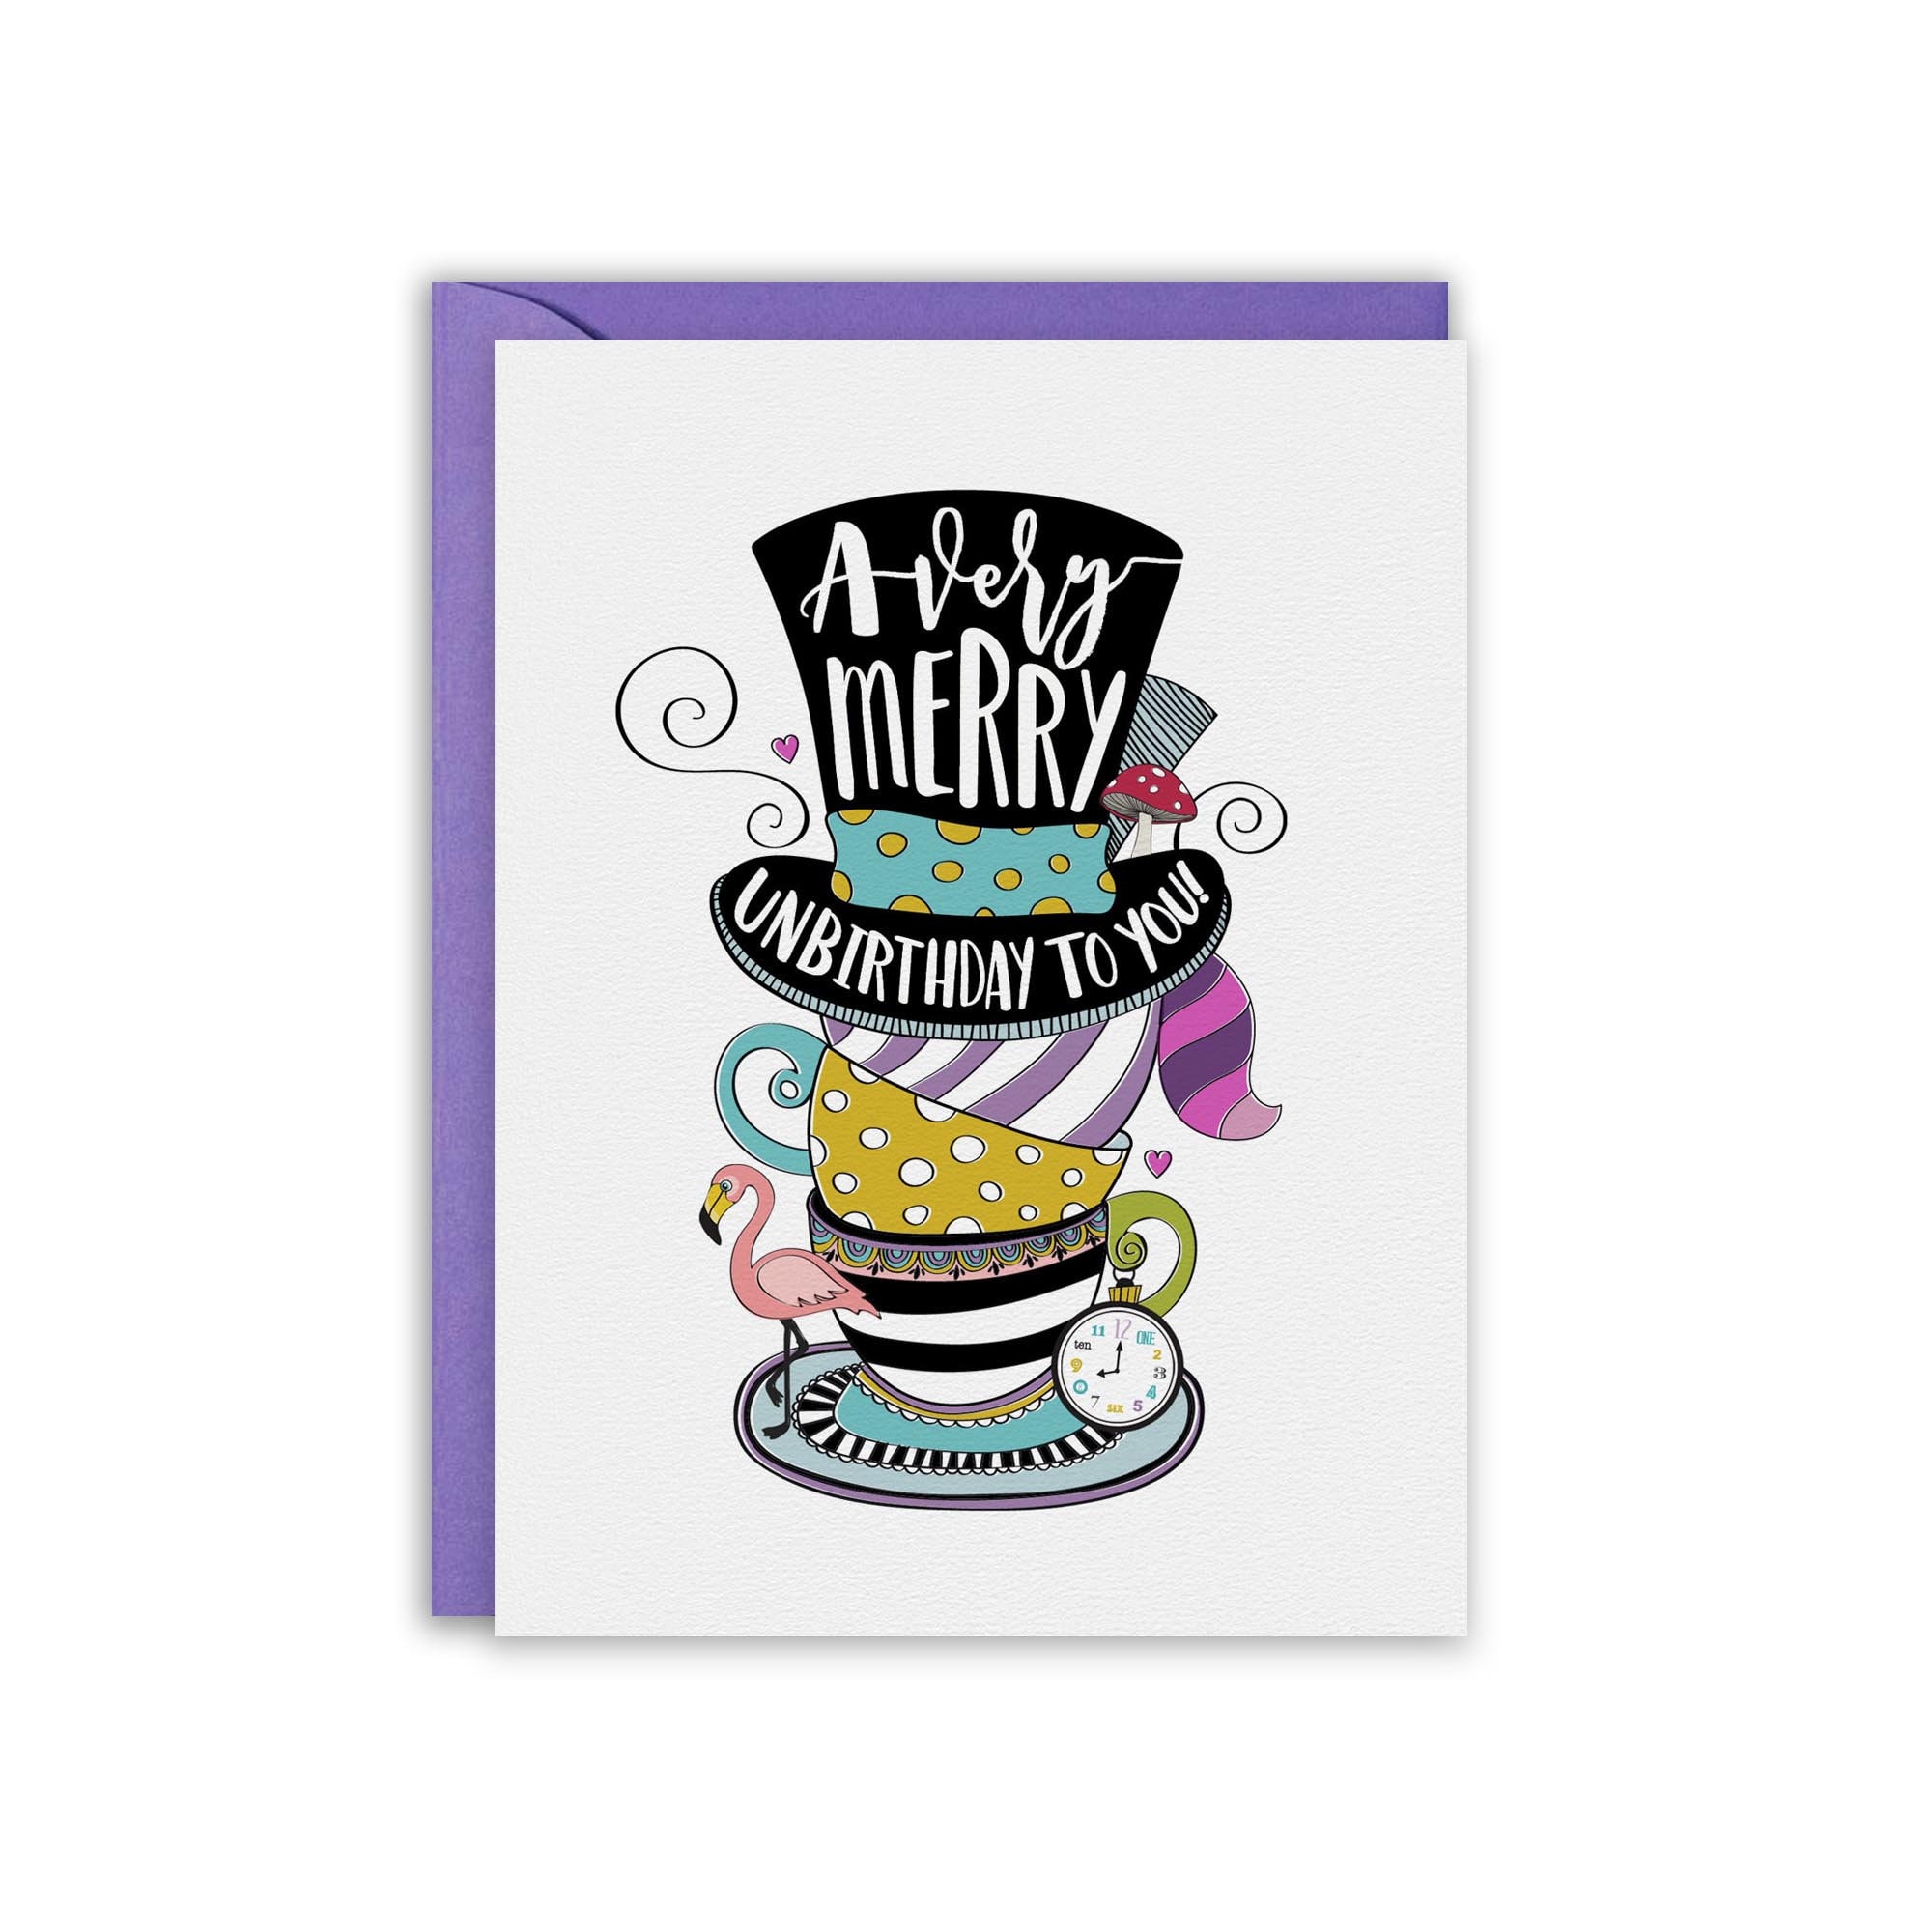 A Very Merry Unbirthday Card Alice in Wonderland Thinking of photo